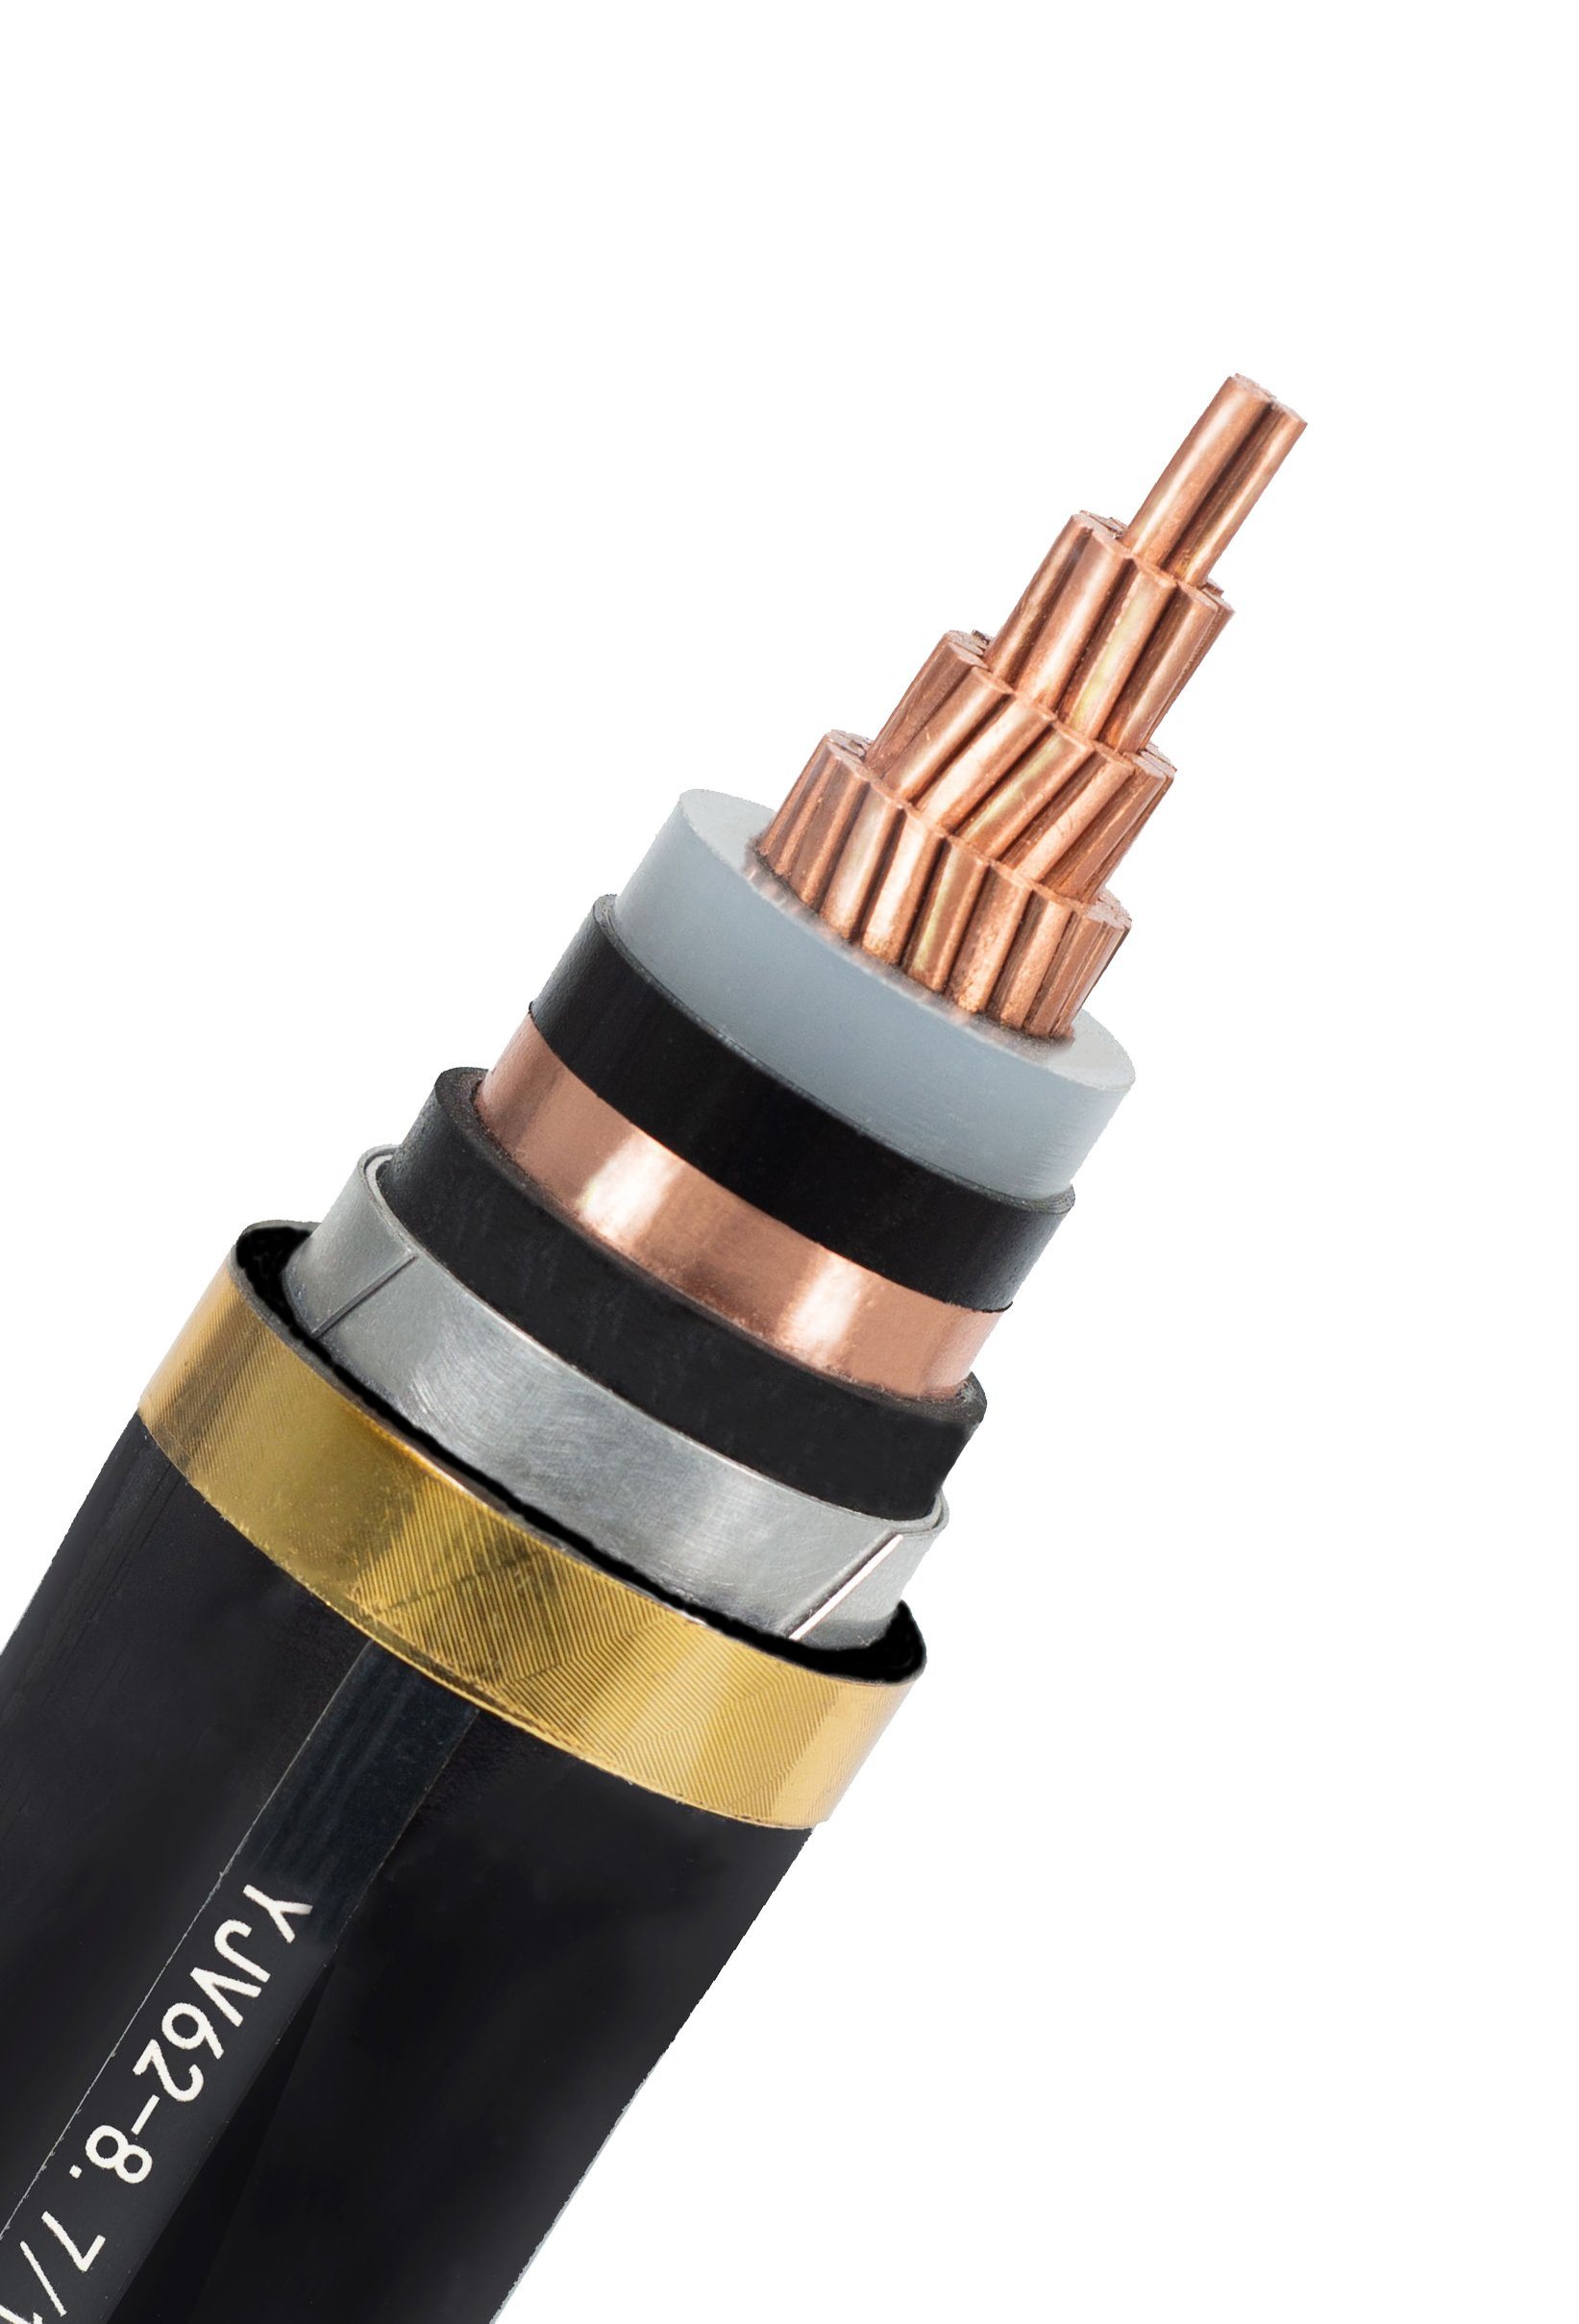 Medium Voltage 8.7/15kv Single Core 120 Sq mm XLPE Insulated PVC Sheath Unrmoured Copper Conductor Electrical Power Cable